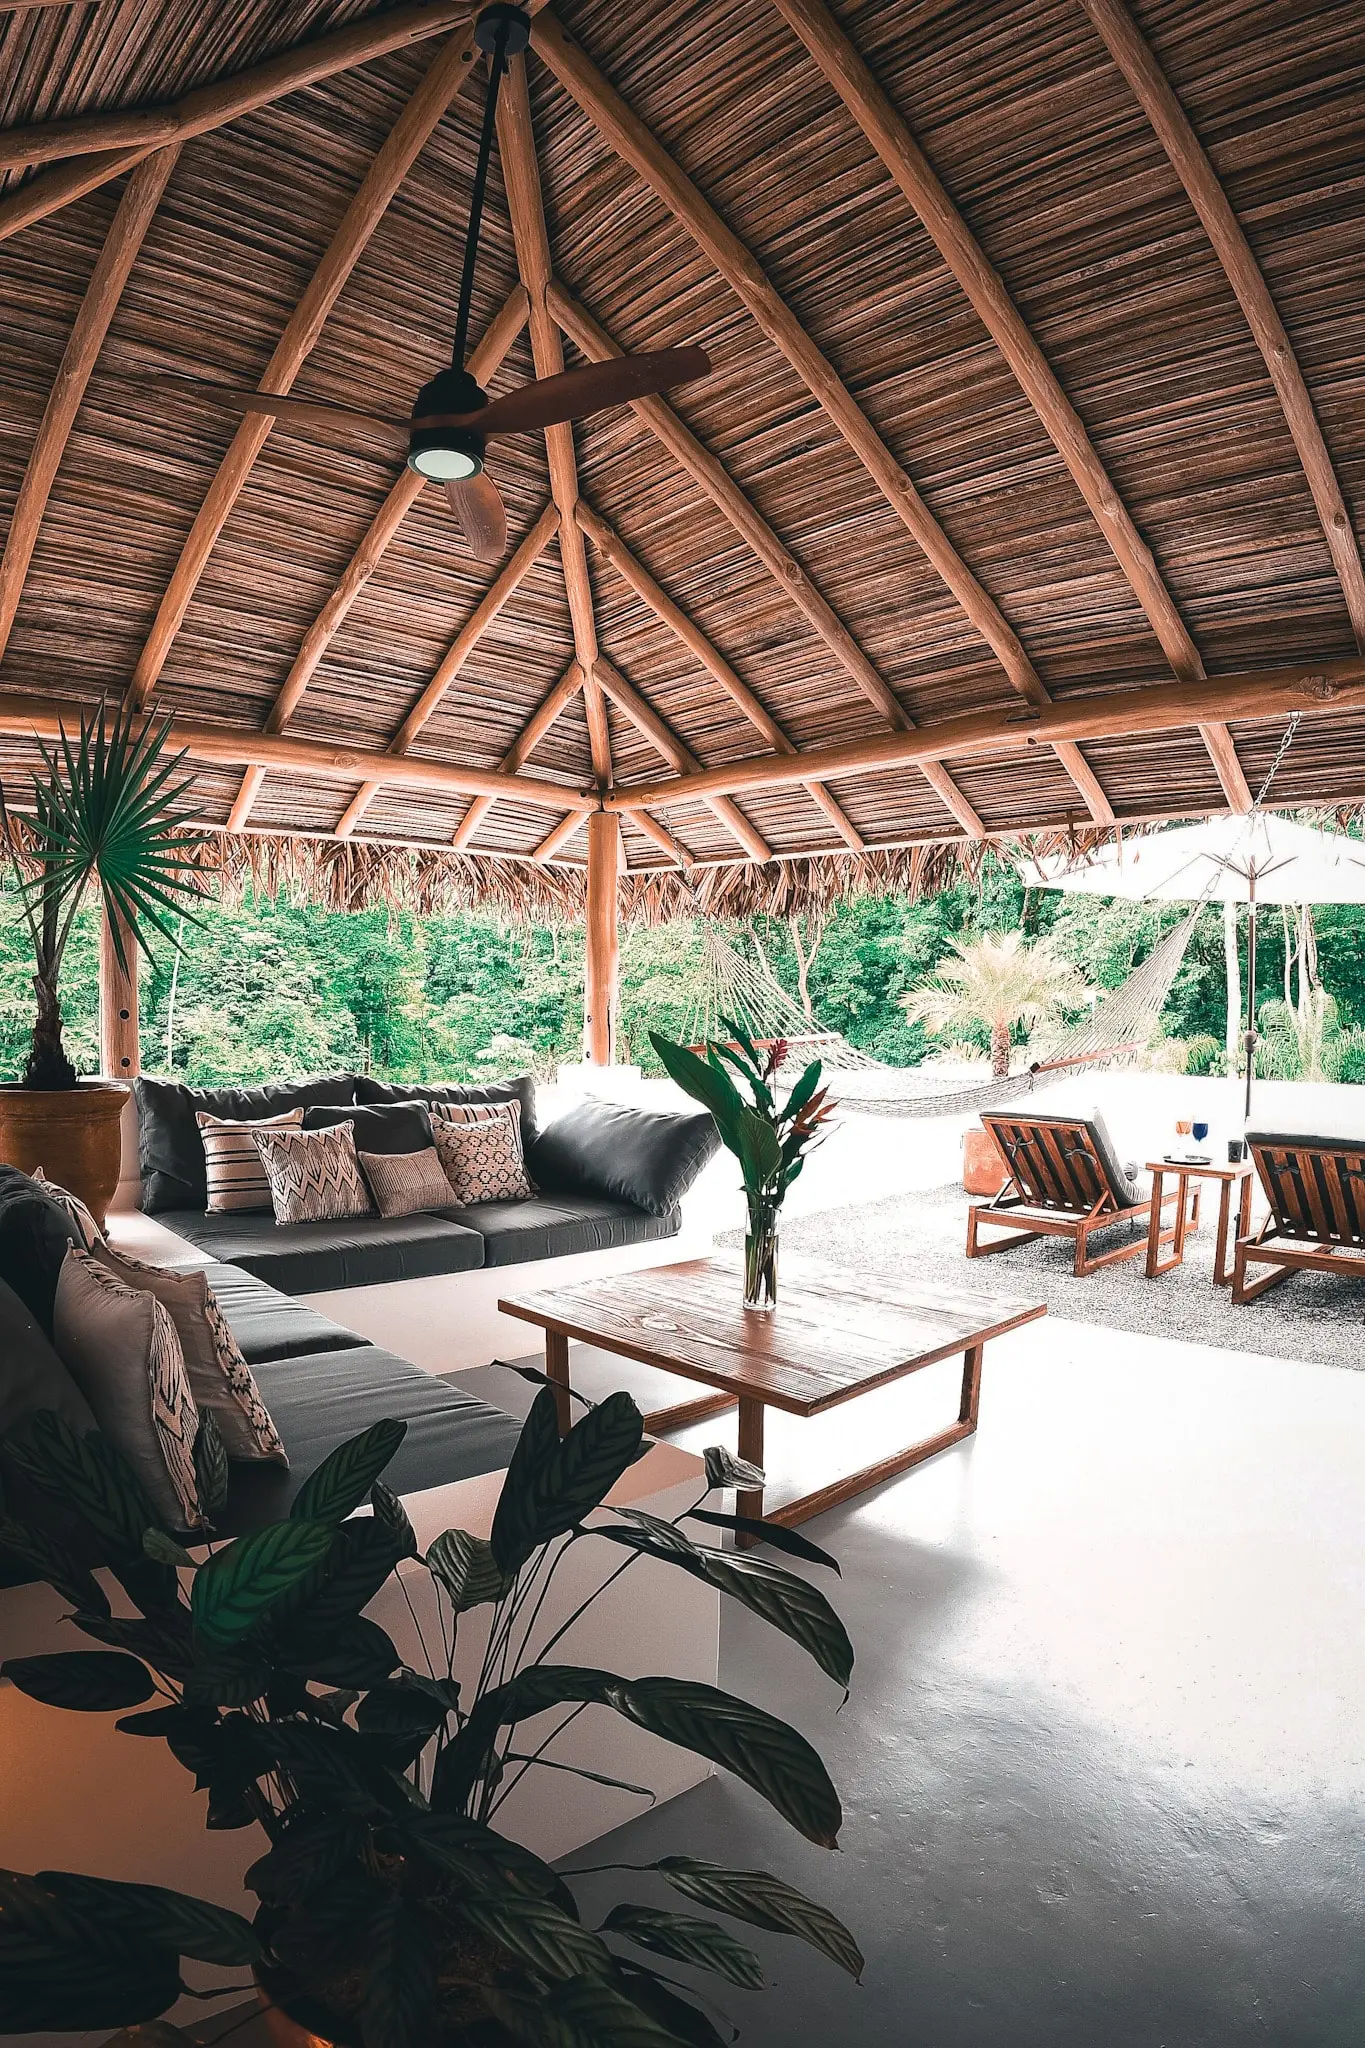 An inviting outdoor lounge area at Vayu Retreat Villas, featuring a cozy sofa set under a thatched roof gazebo with views of the lush jungle. The scene includes comfortable seating, a hammock, and a wooden coffee table, capturing the essence of one of the best hotels in Uvita, Costa Rica, known for its serene and luxurious jungle retreat atmosphere.